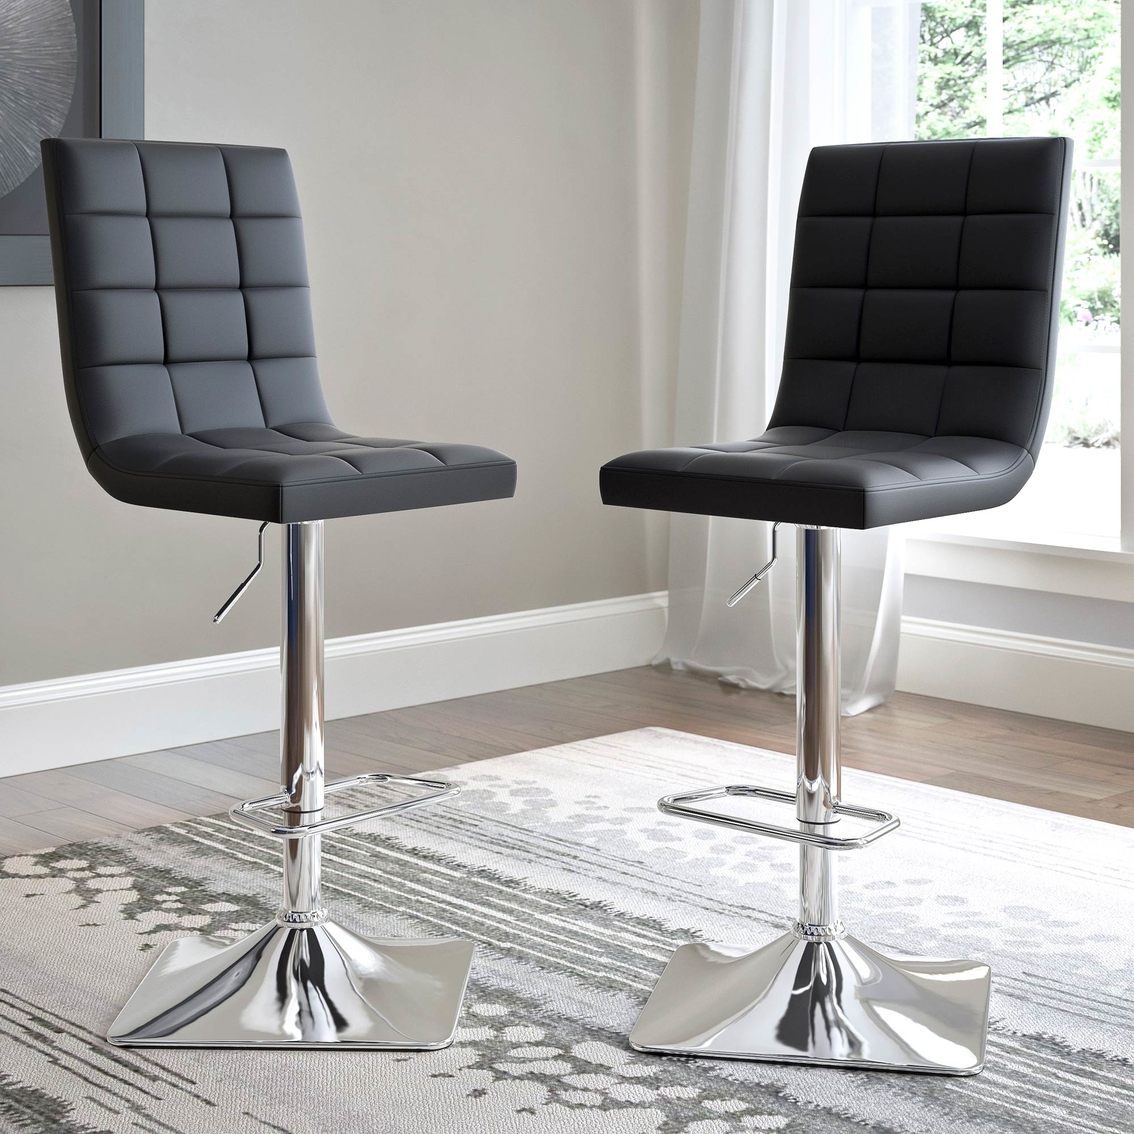 CorLiving Adjustable Barstool in Bonded Leather 2 Pk. - Image 4 of 4